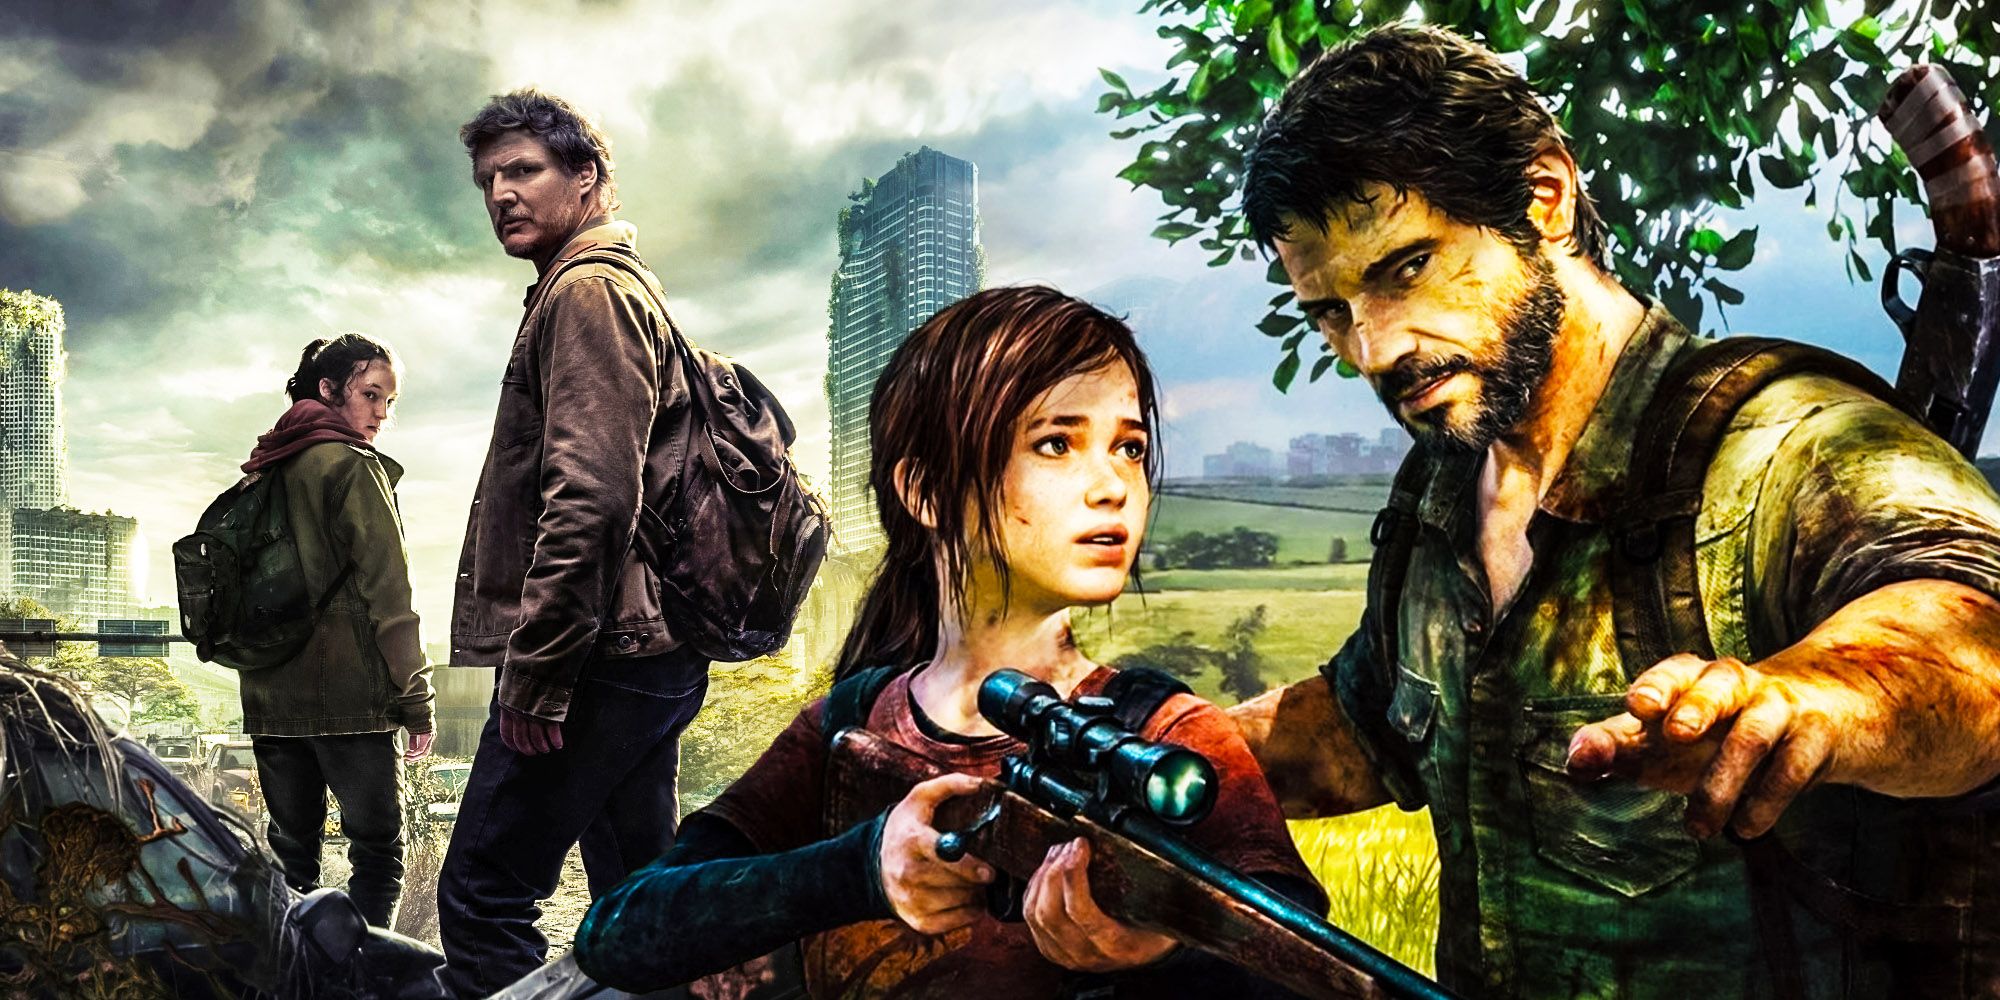 Why The DVD Sarah Borrows In The Last Of Us Episode 1 Means So